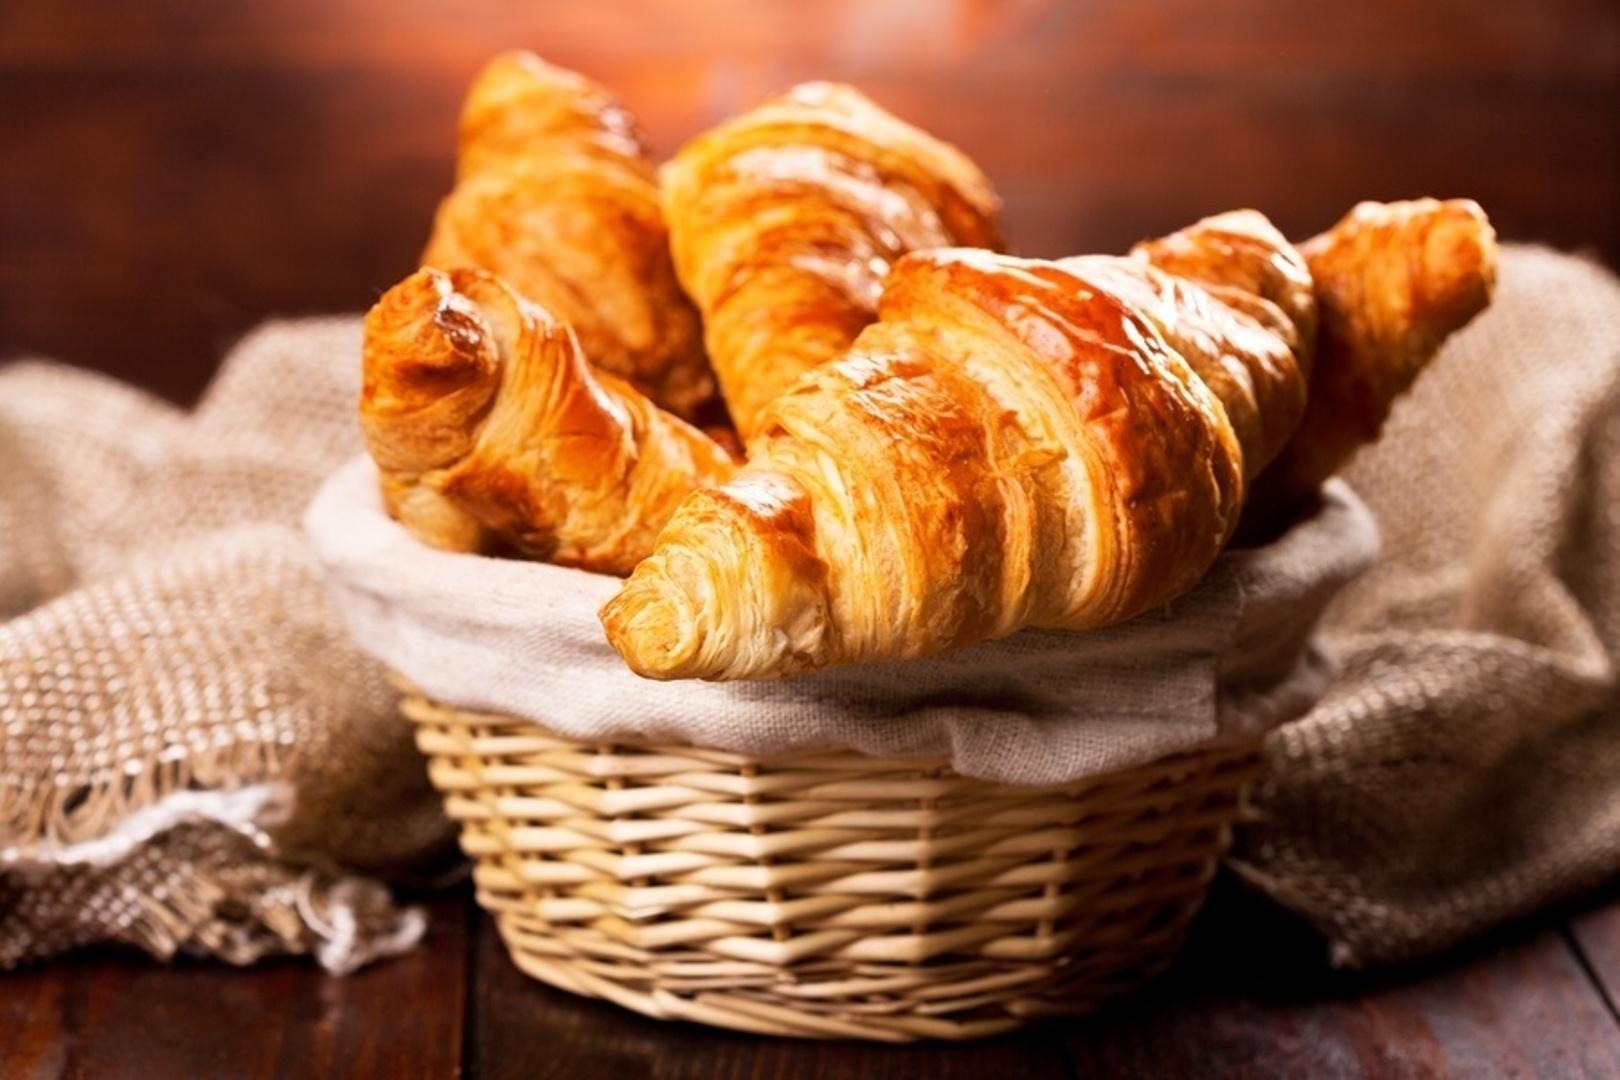 East Village: Bake your own French Croissant (03-03-2020 starts at 6:30 PM)